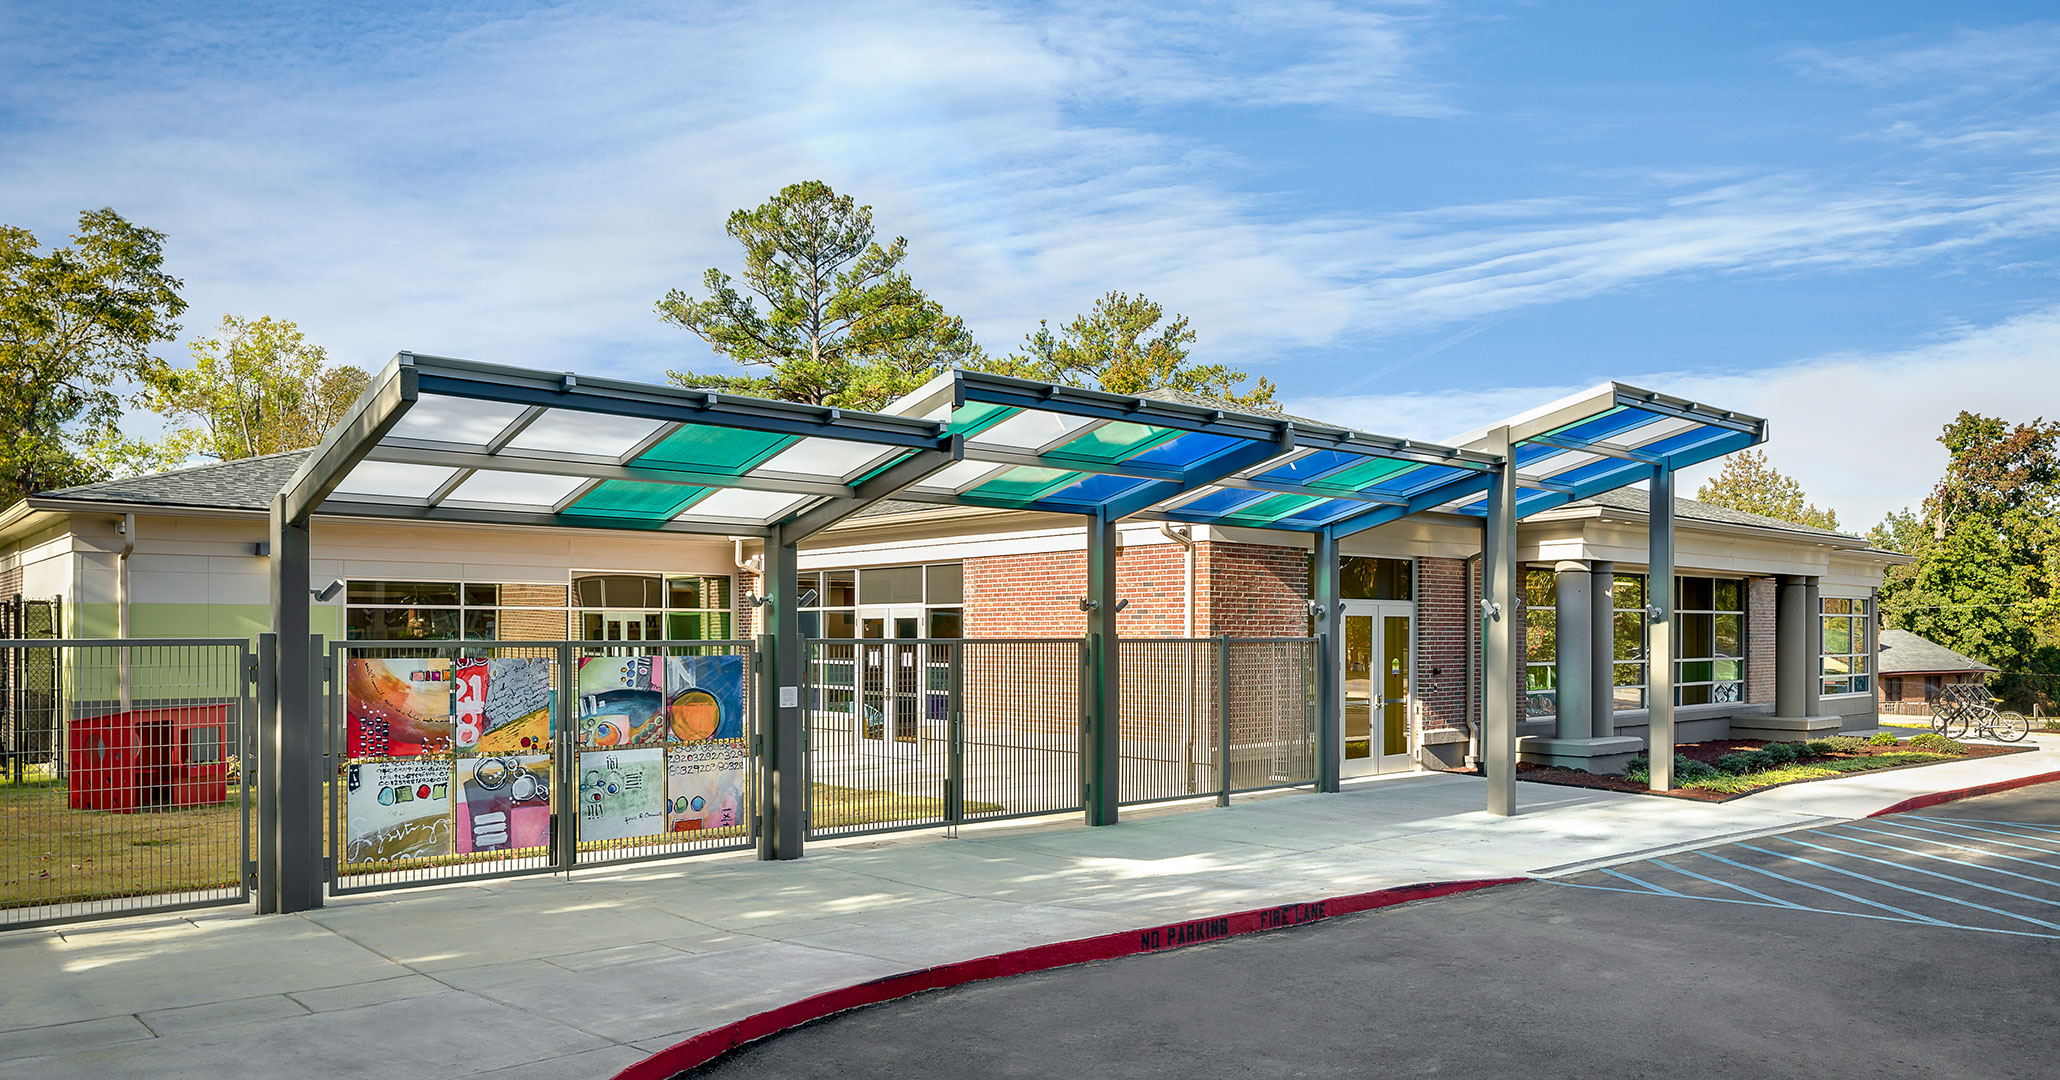 Richland County Library worked with Boudreaux to design modern exterior elements for Richland North Main Library.